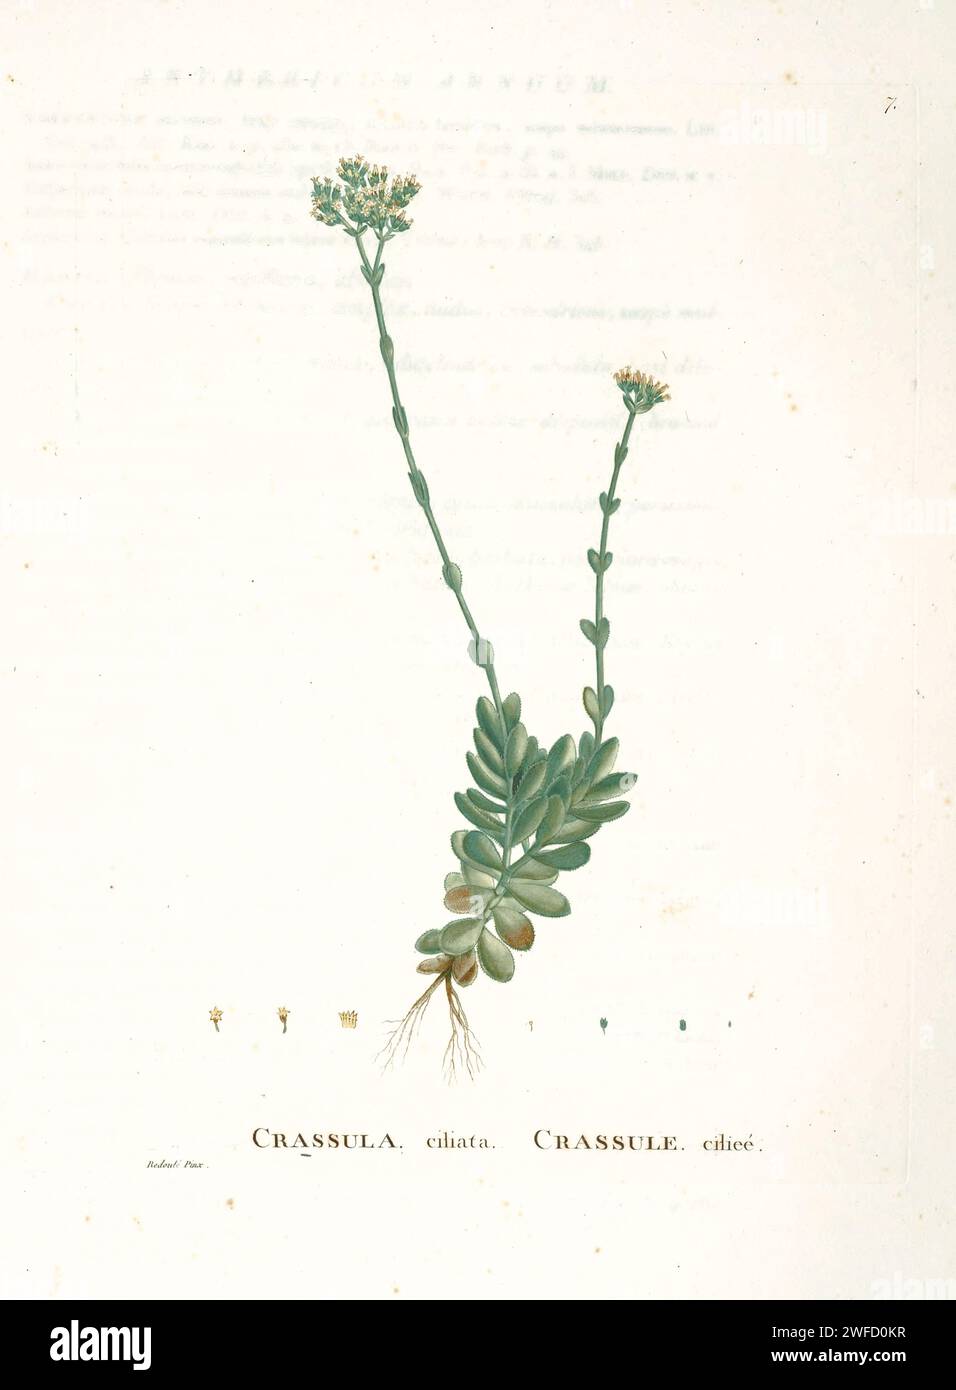 Crassula ciliata from History of Succulent Plants [Plantarum historia succulentarum / Histoire des plantes grasses] painted by Pierre-Joseph Redouté and described by Augustin Pyramus de Candolle Stock Photo